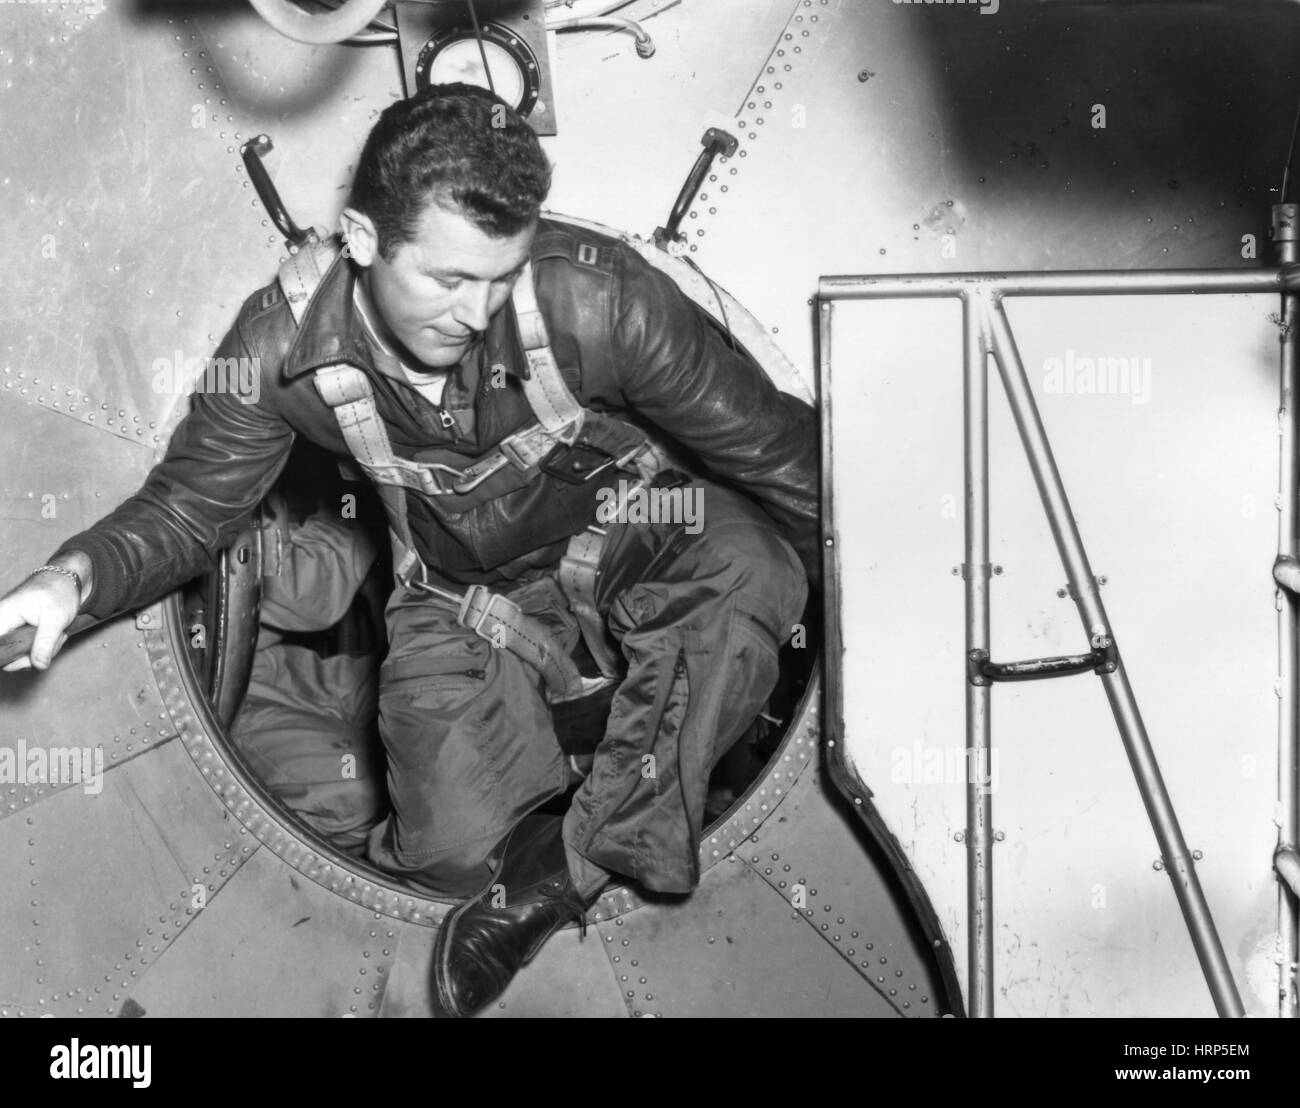 Chuck Yeager imbarco Bell X-1, 1947 Foto Stock